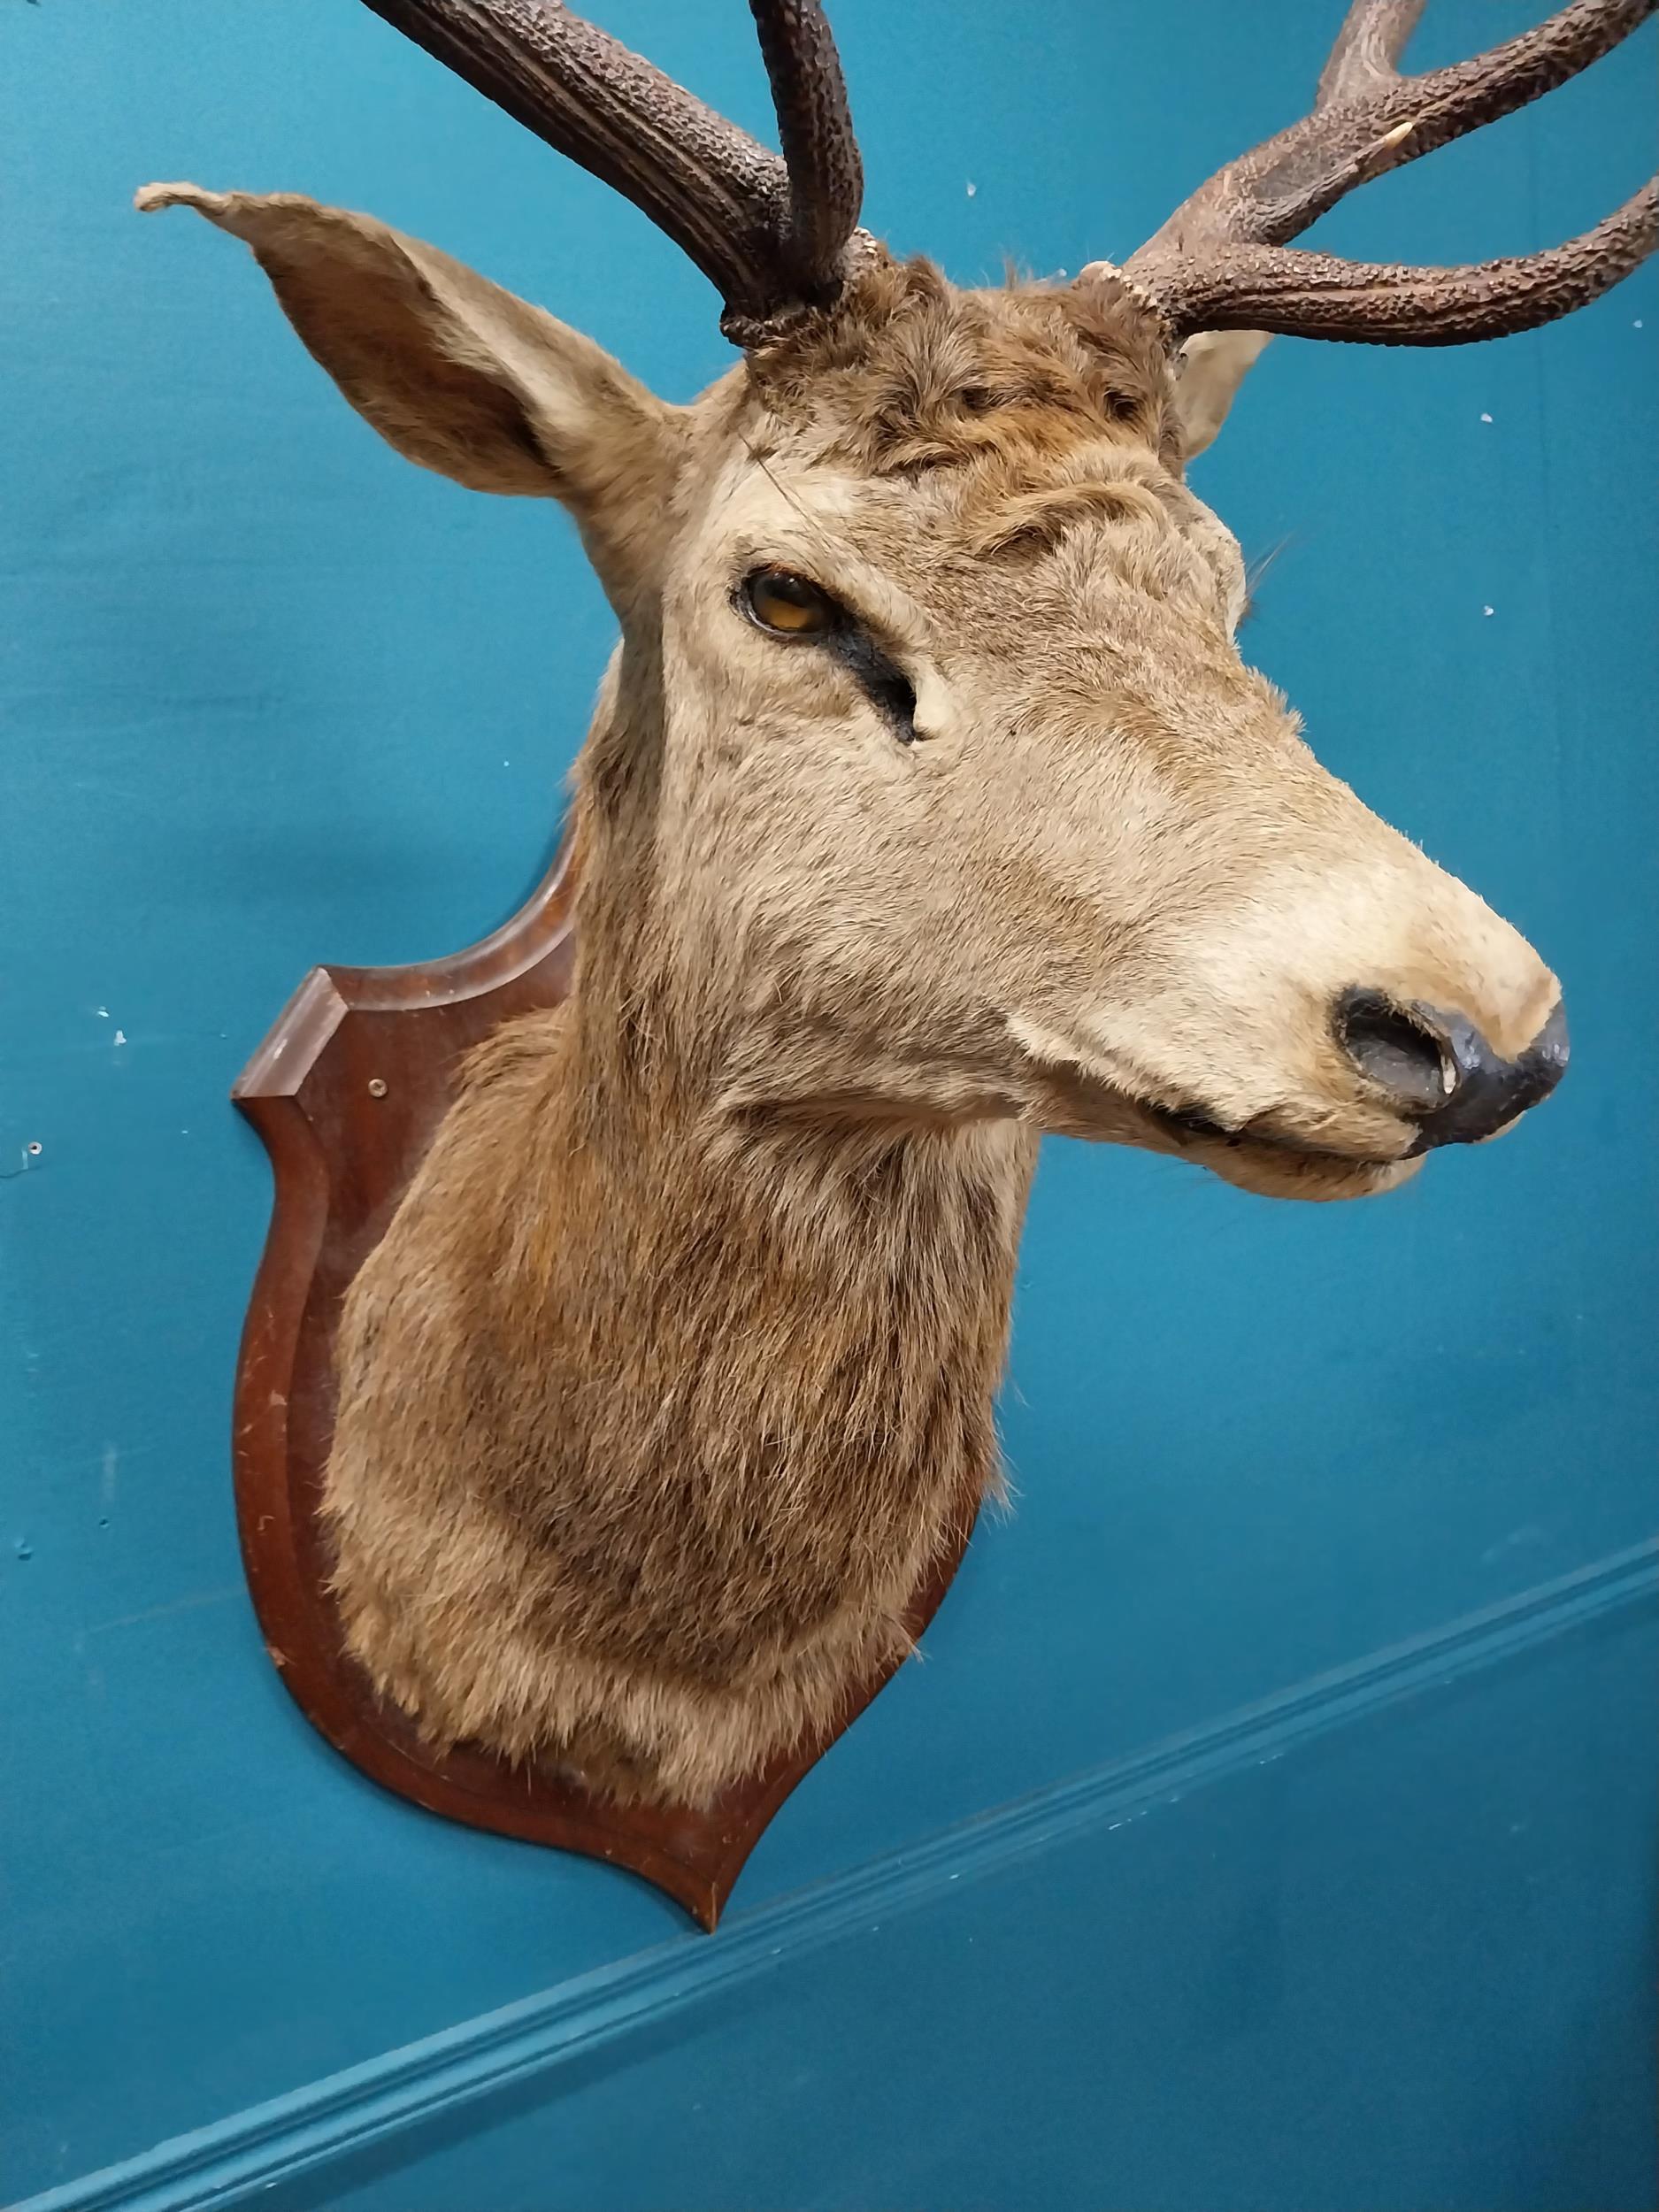 Early 20th C. taxidermy Stags head mounted on oak plaque {140 cm H x 100 cm W x 70 cm D}. - Image 2 of 3